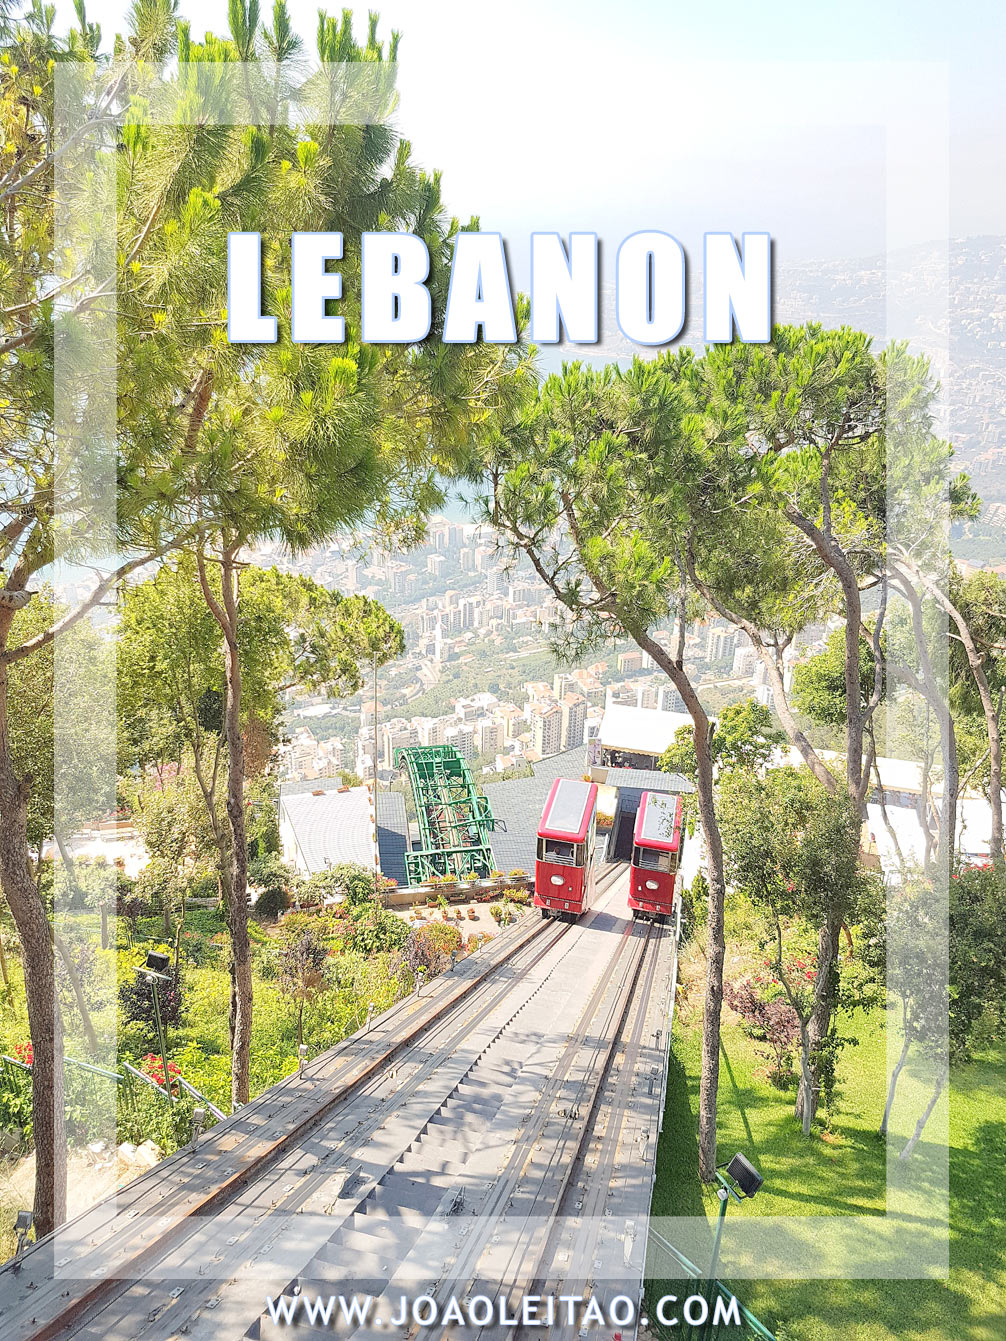 Interesting facts about Lebanon